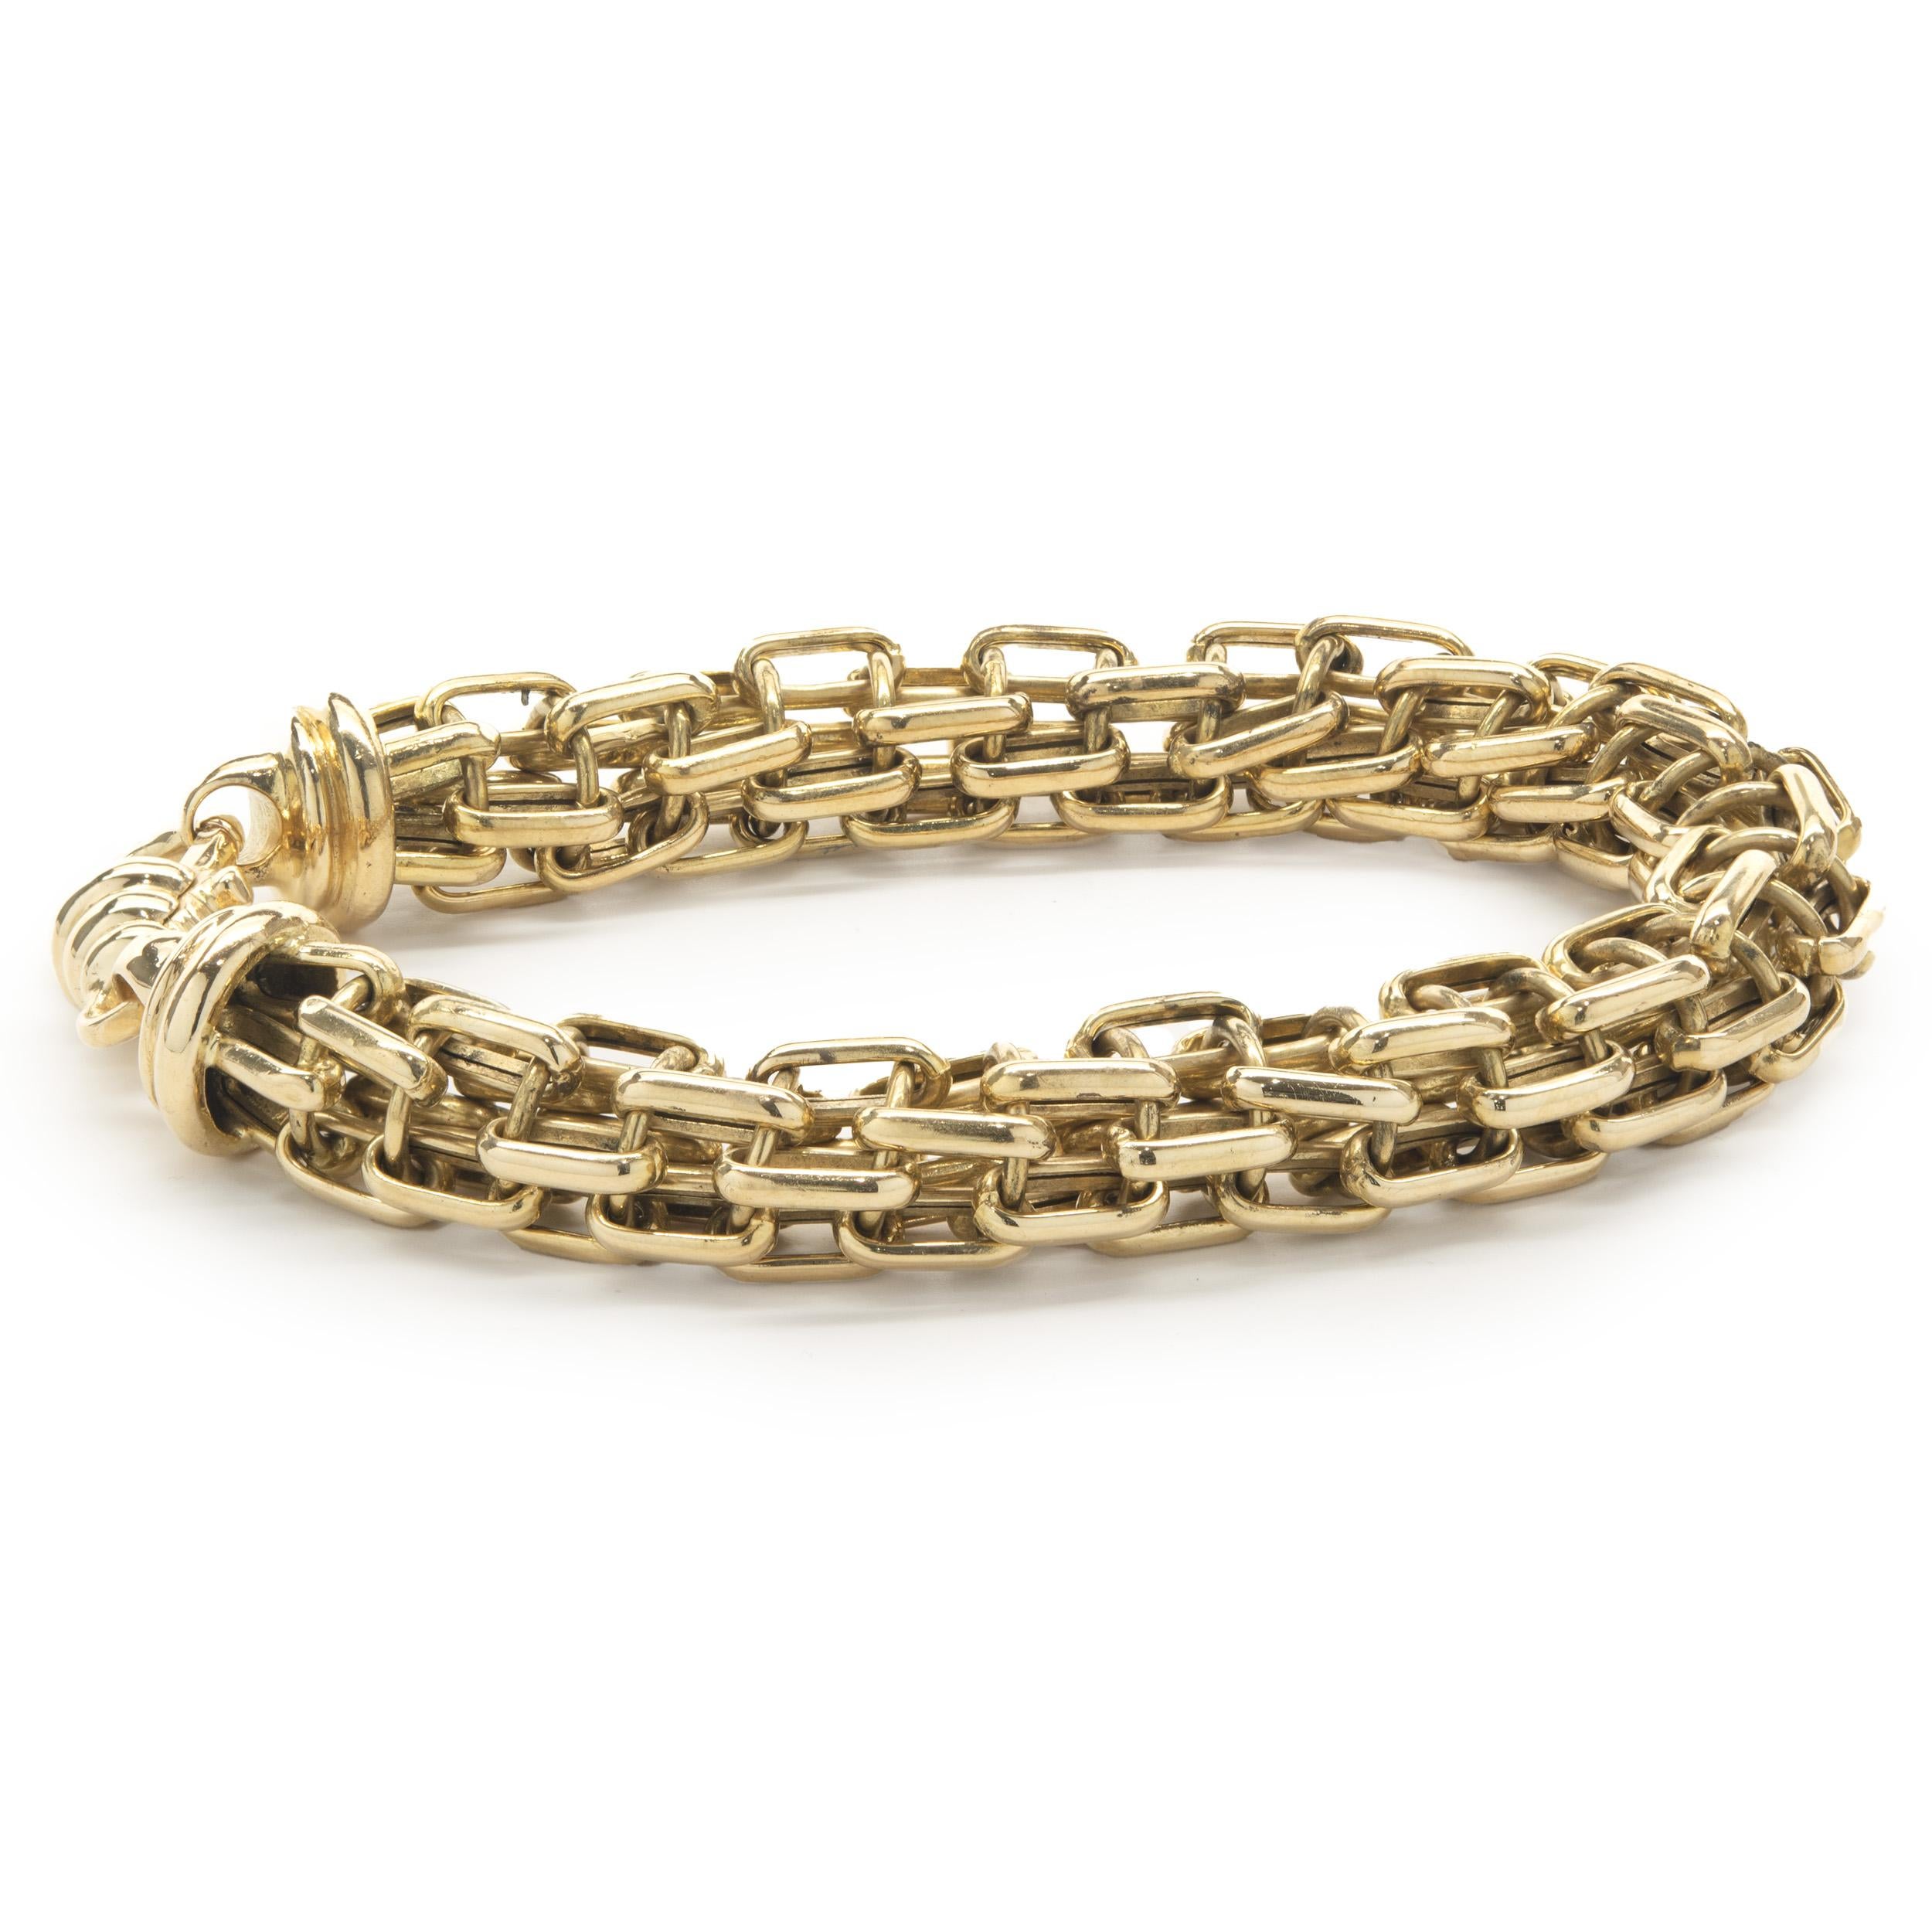 Material: 18K yellow gold
Dimensions: bracelet will fit up to a 8.5-inch wrist
Weight: 46.09 grams